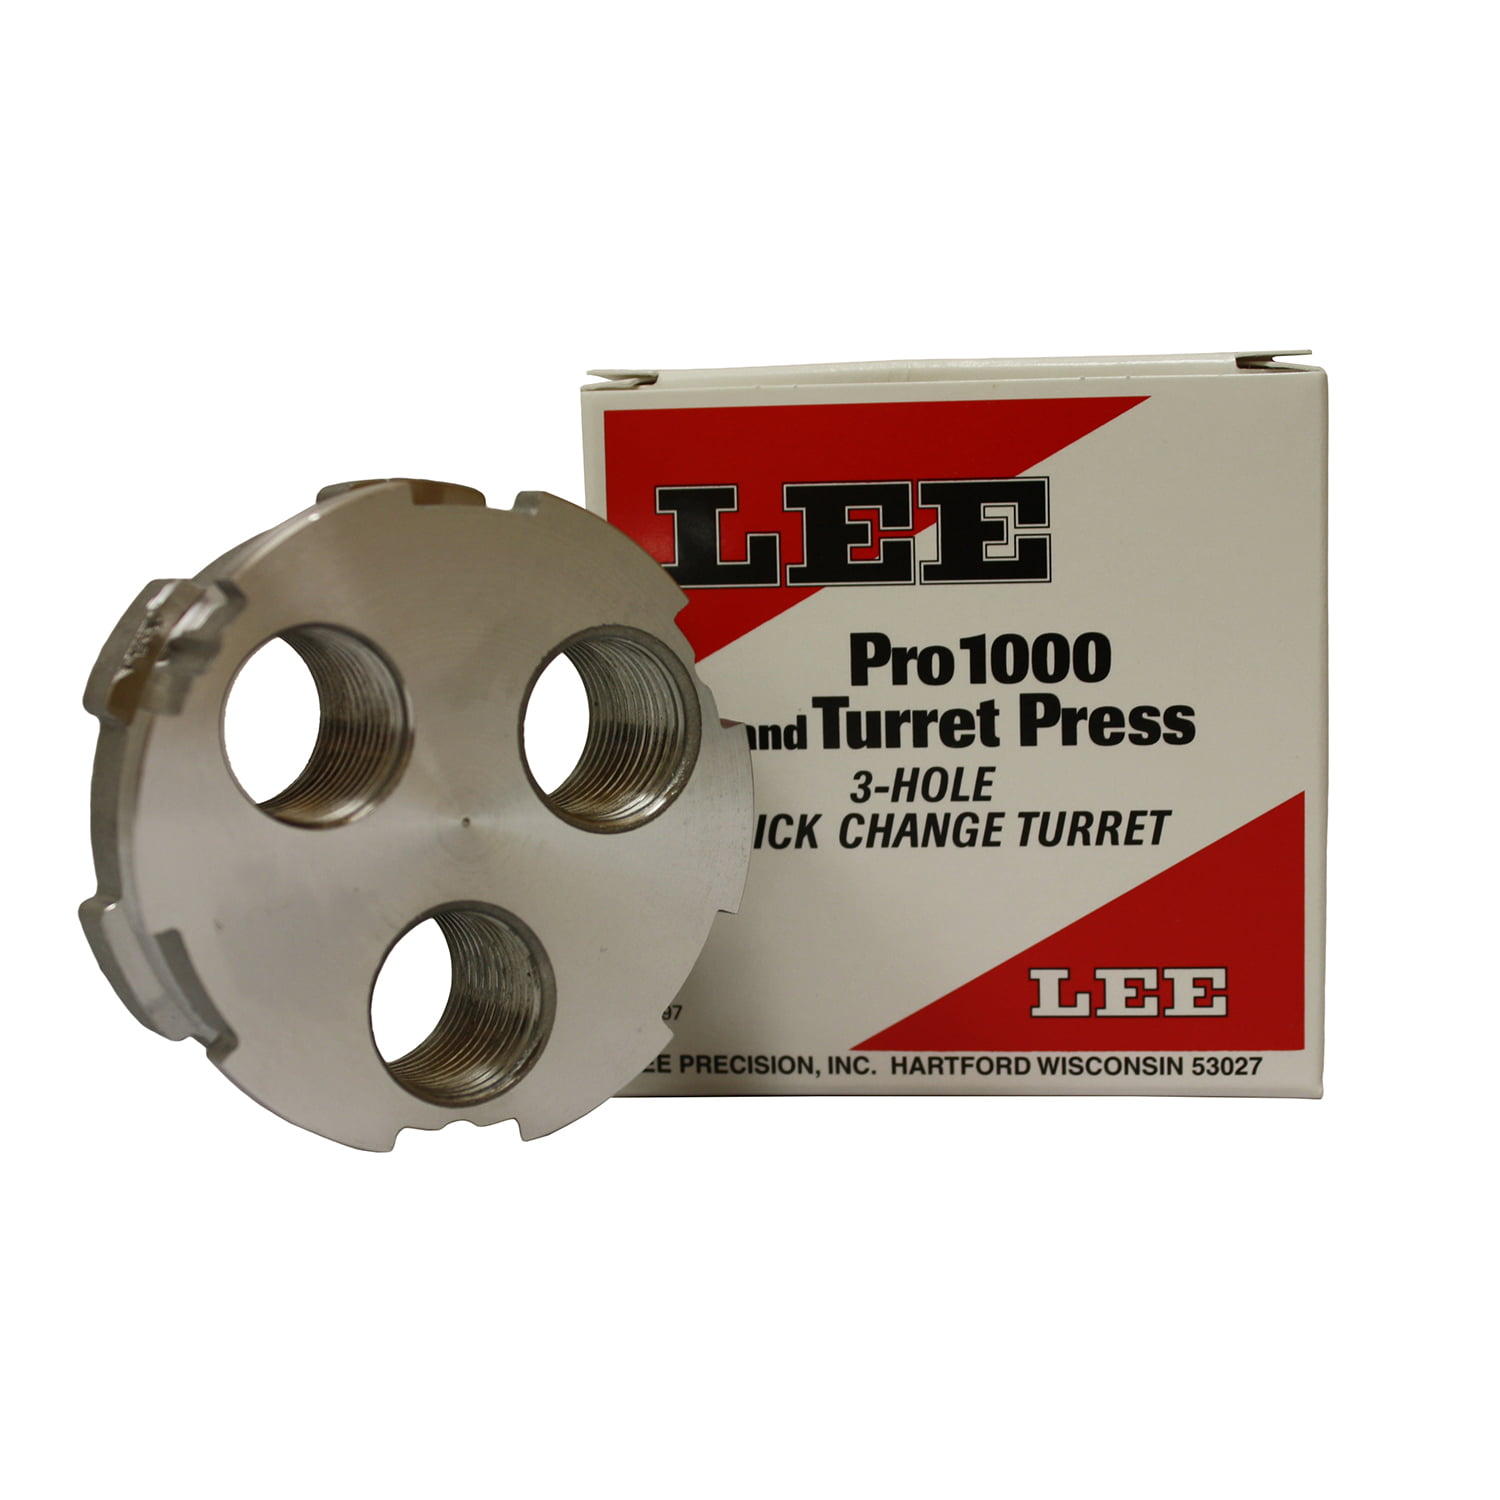 2 LEE 4-HOLE QUICK CHANGE TURRETS < quantity of FREE SHIPPING > TWO 90269 New 